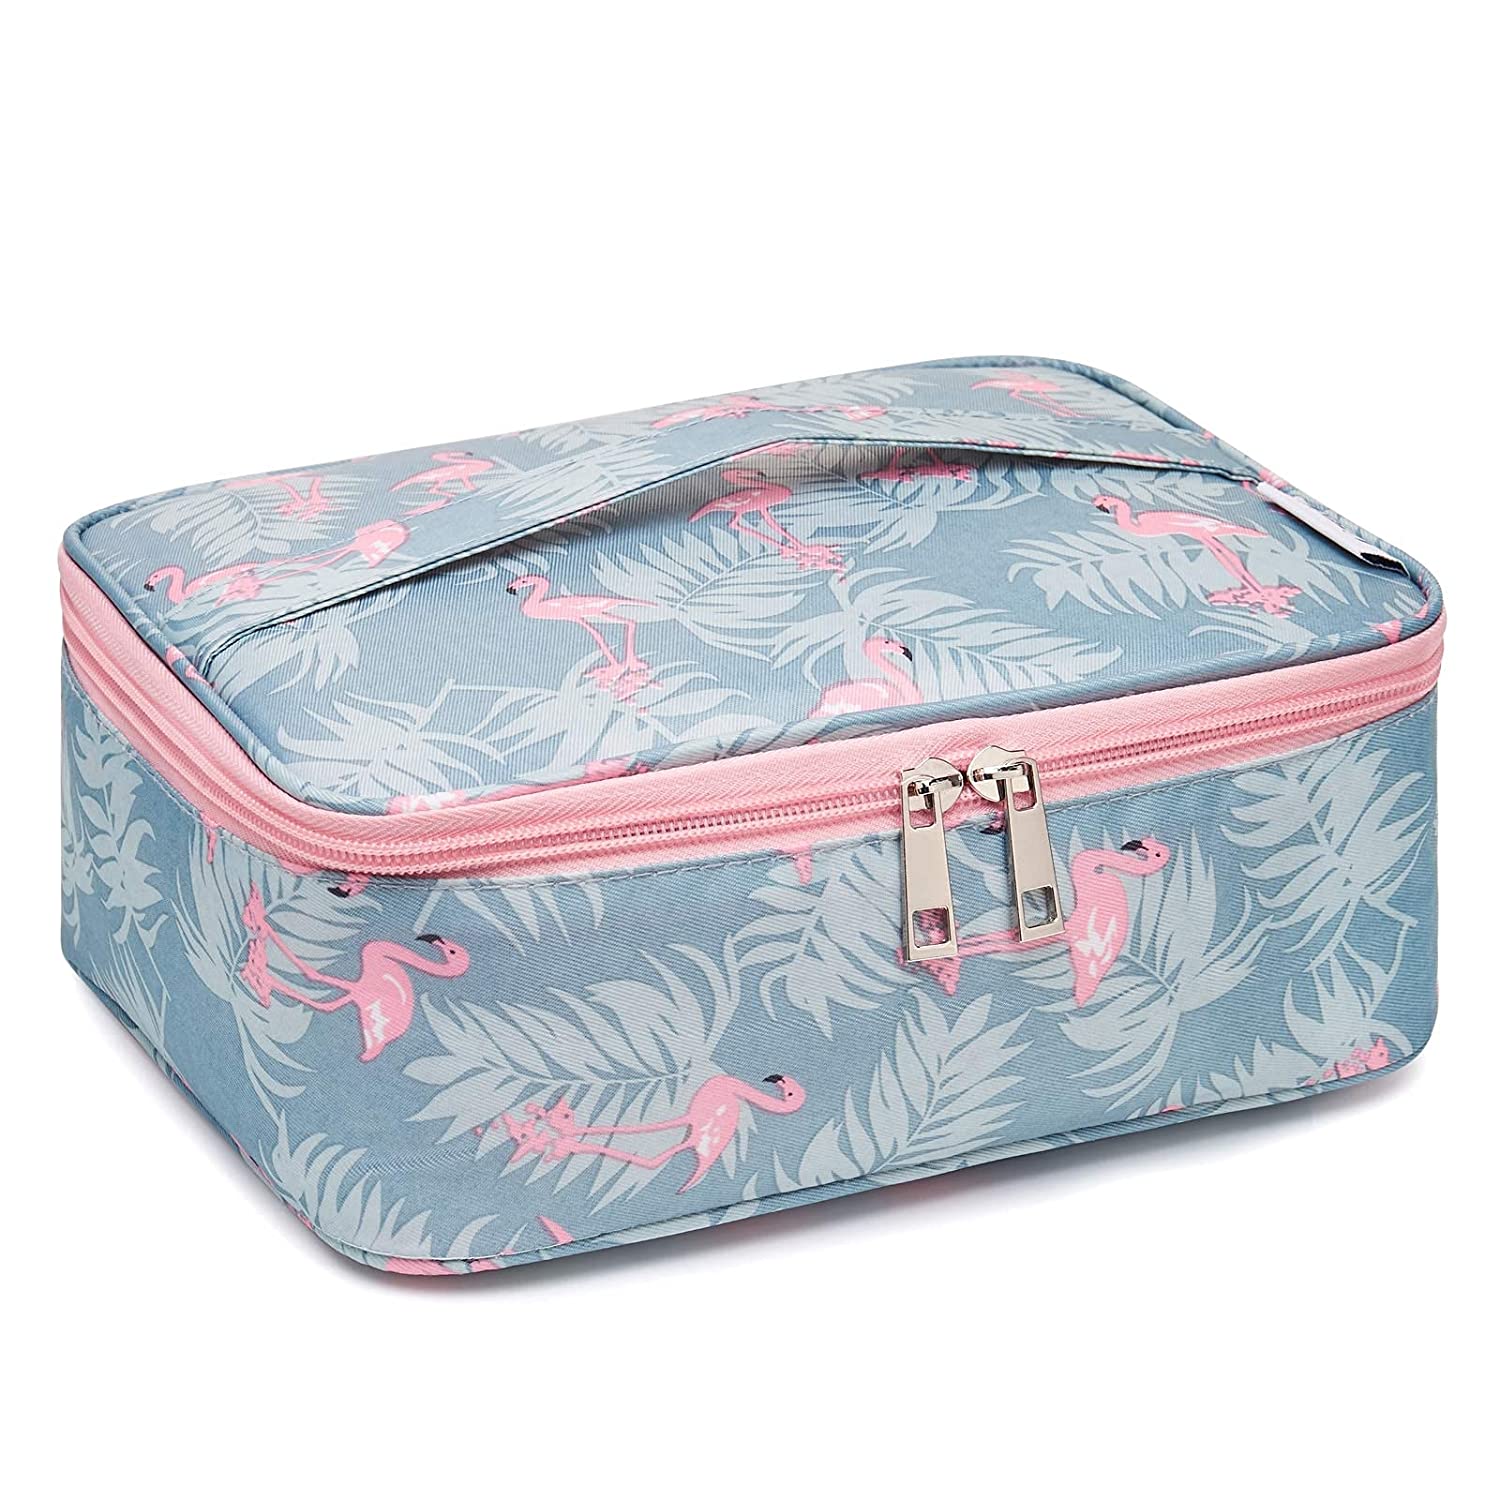 Norway large cosmetic bag for girls